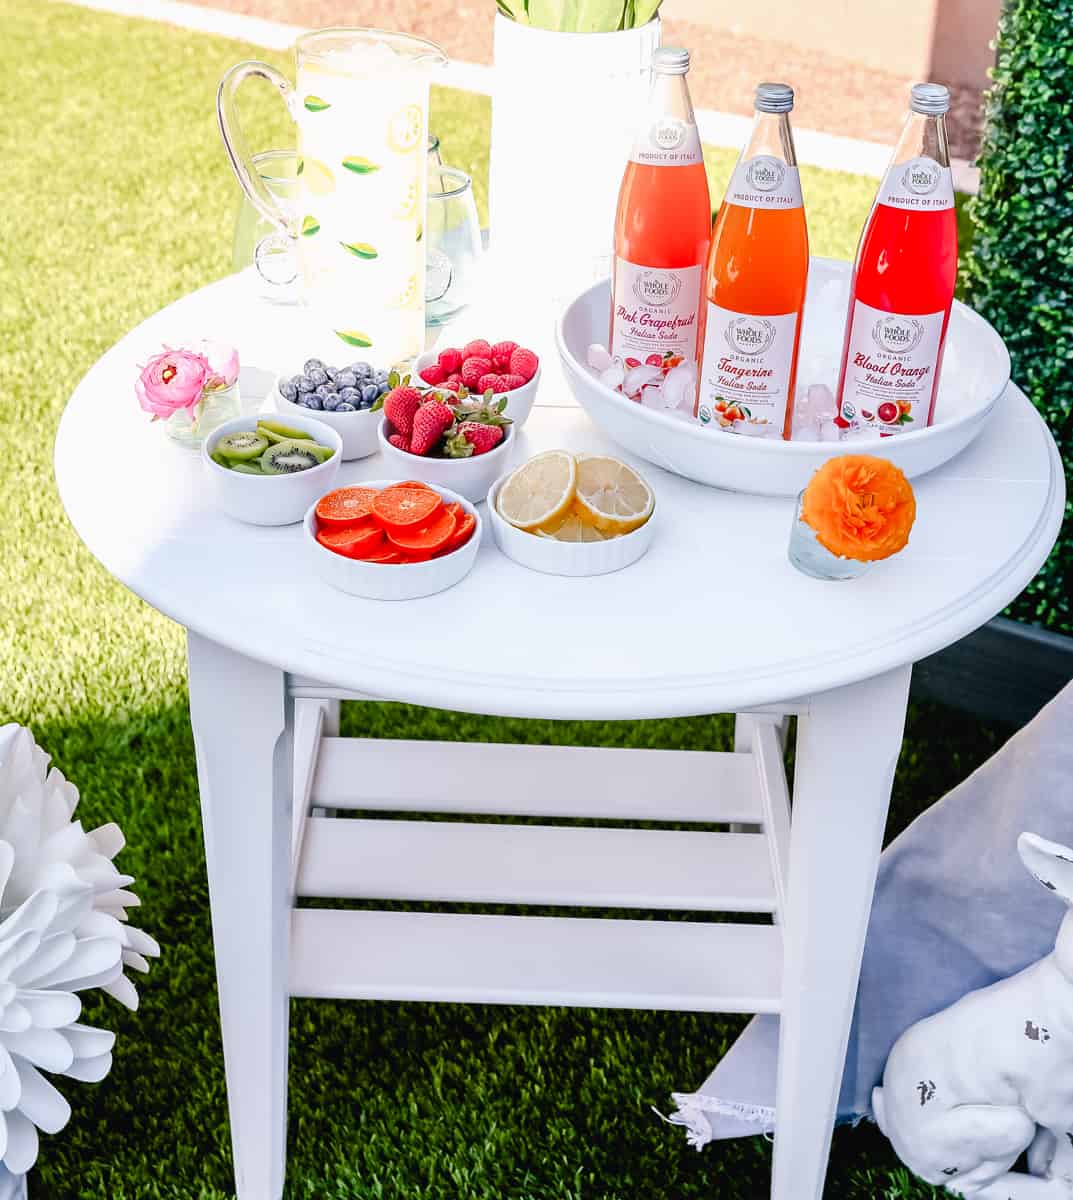 Italian Soda Drink Bar with Fruit. How to create the Ultimate Spring Brunch or Spring Party with an assortment of both sweet and savory breakfast items and beautiful desserts. 30+ Spring and Easter Party Food Ideas. How to decorate for a Spring Brunch and Party too.